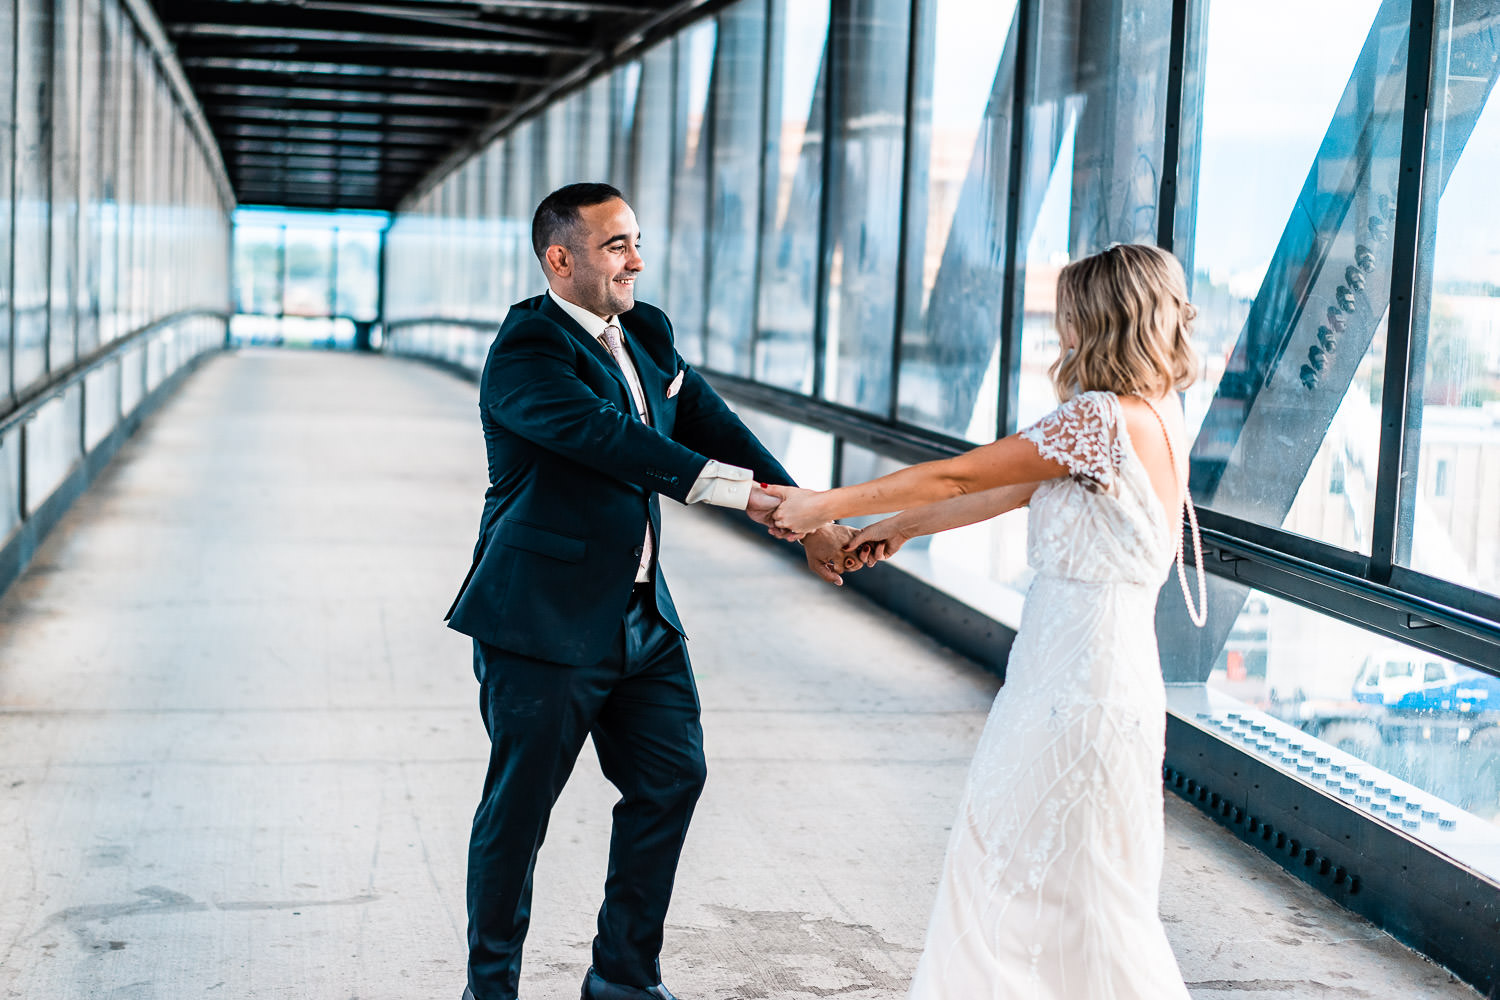 RiNo Denver Elopement | Run Wild With Me Photography